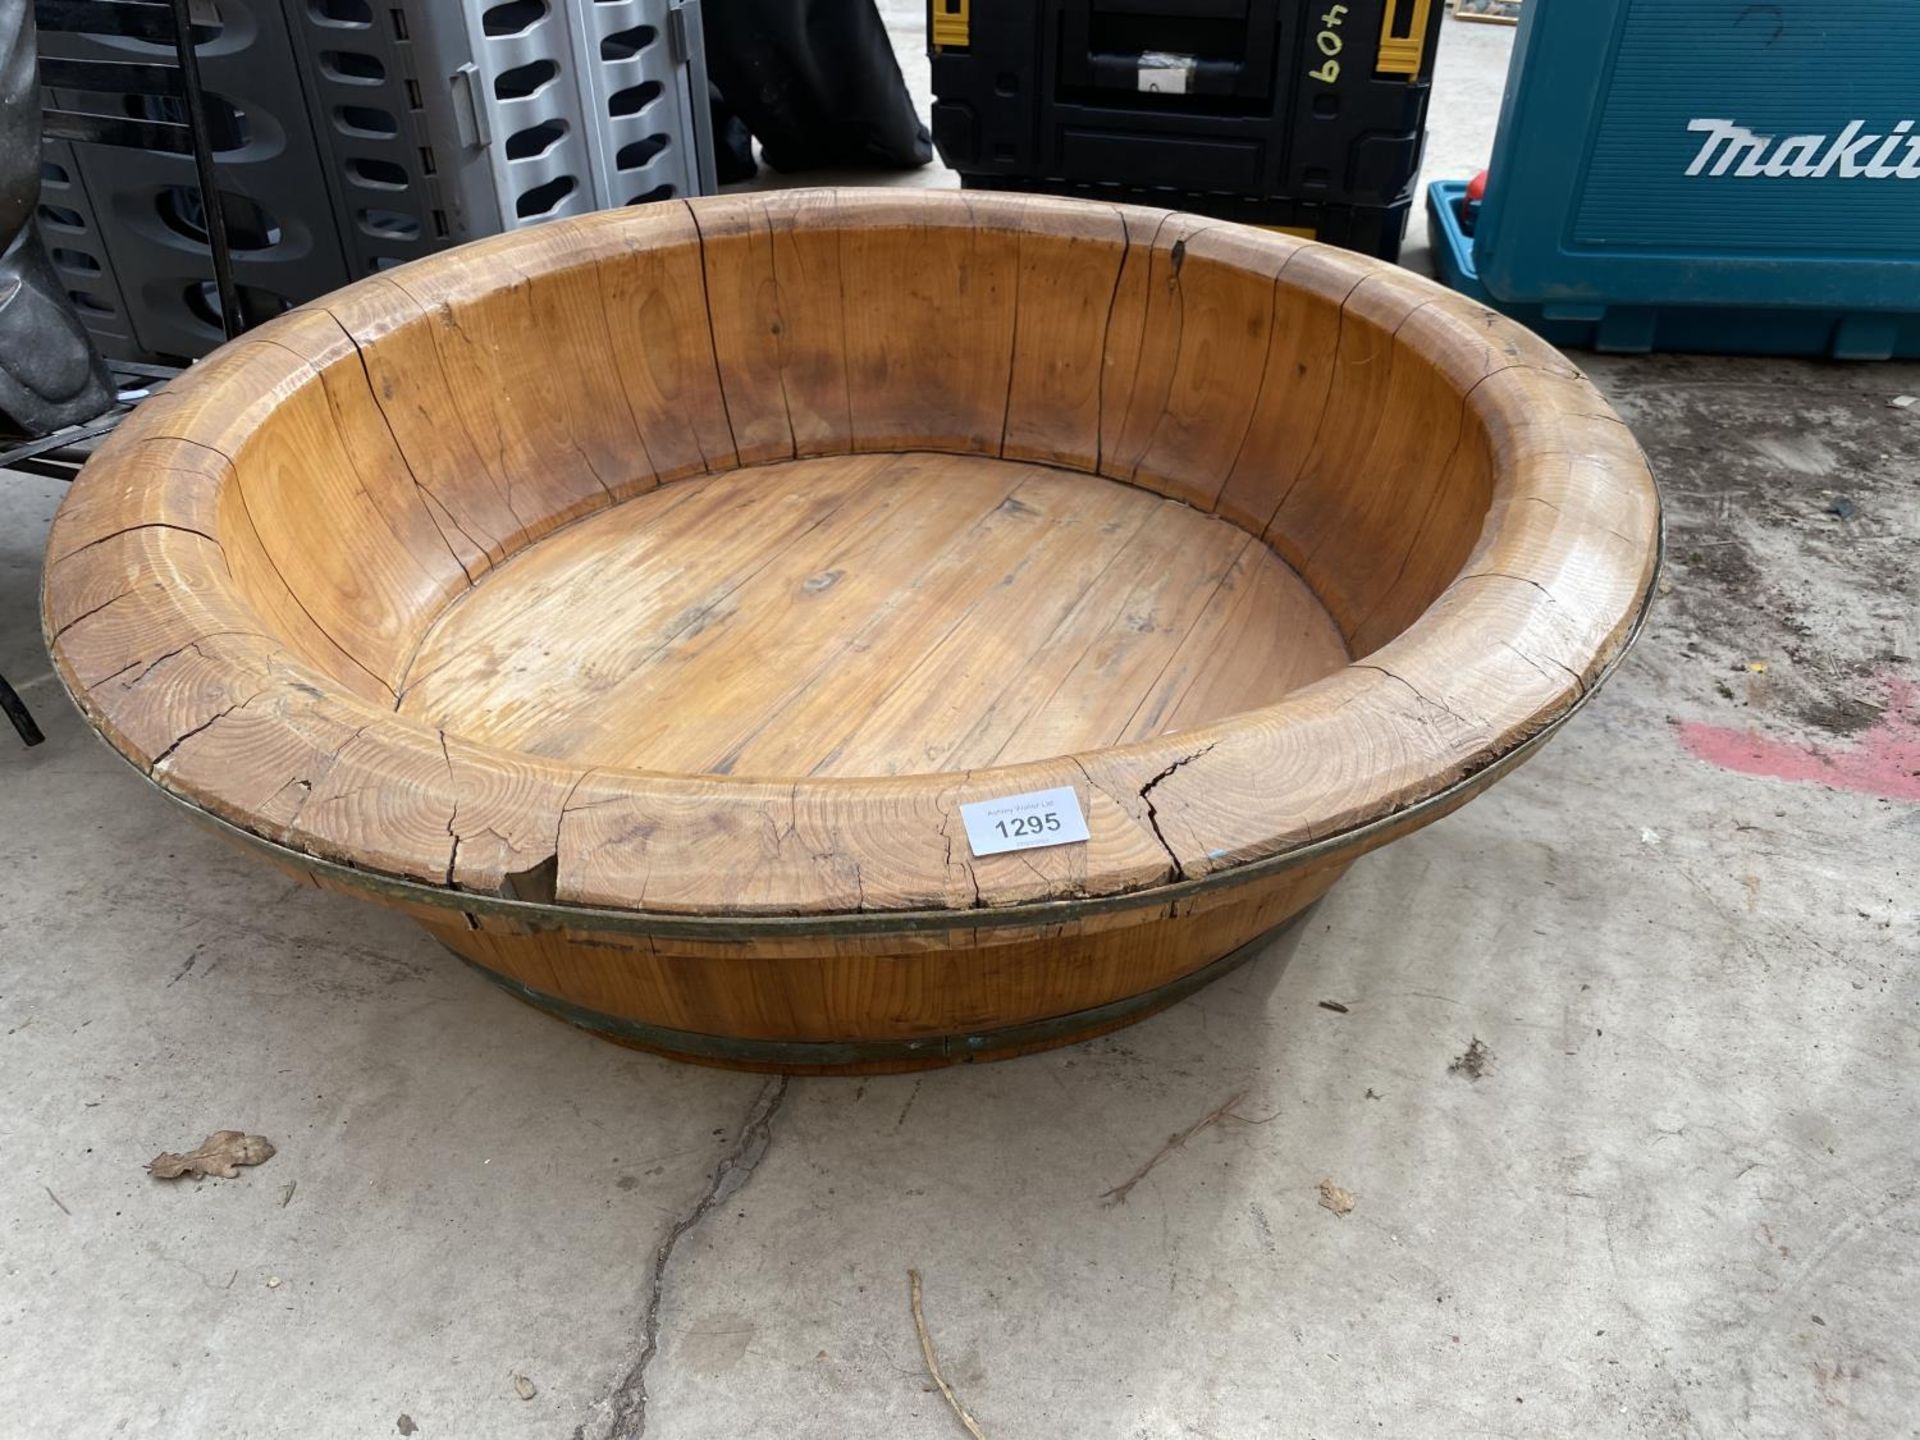 A LARGE WOODEN BOWL WITH METAL BANDING